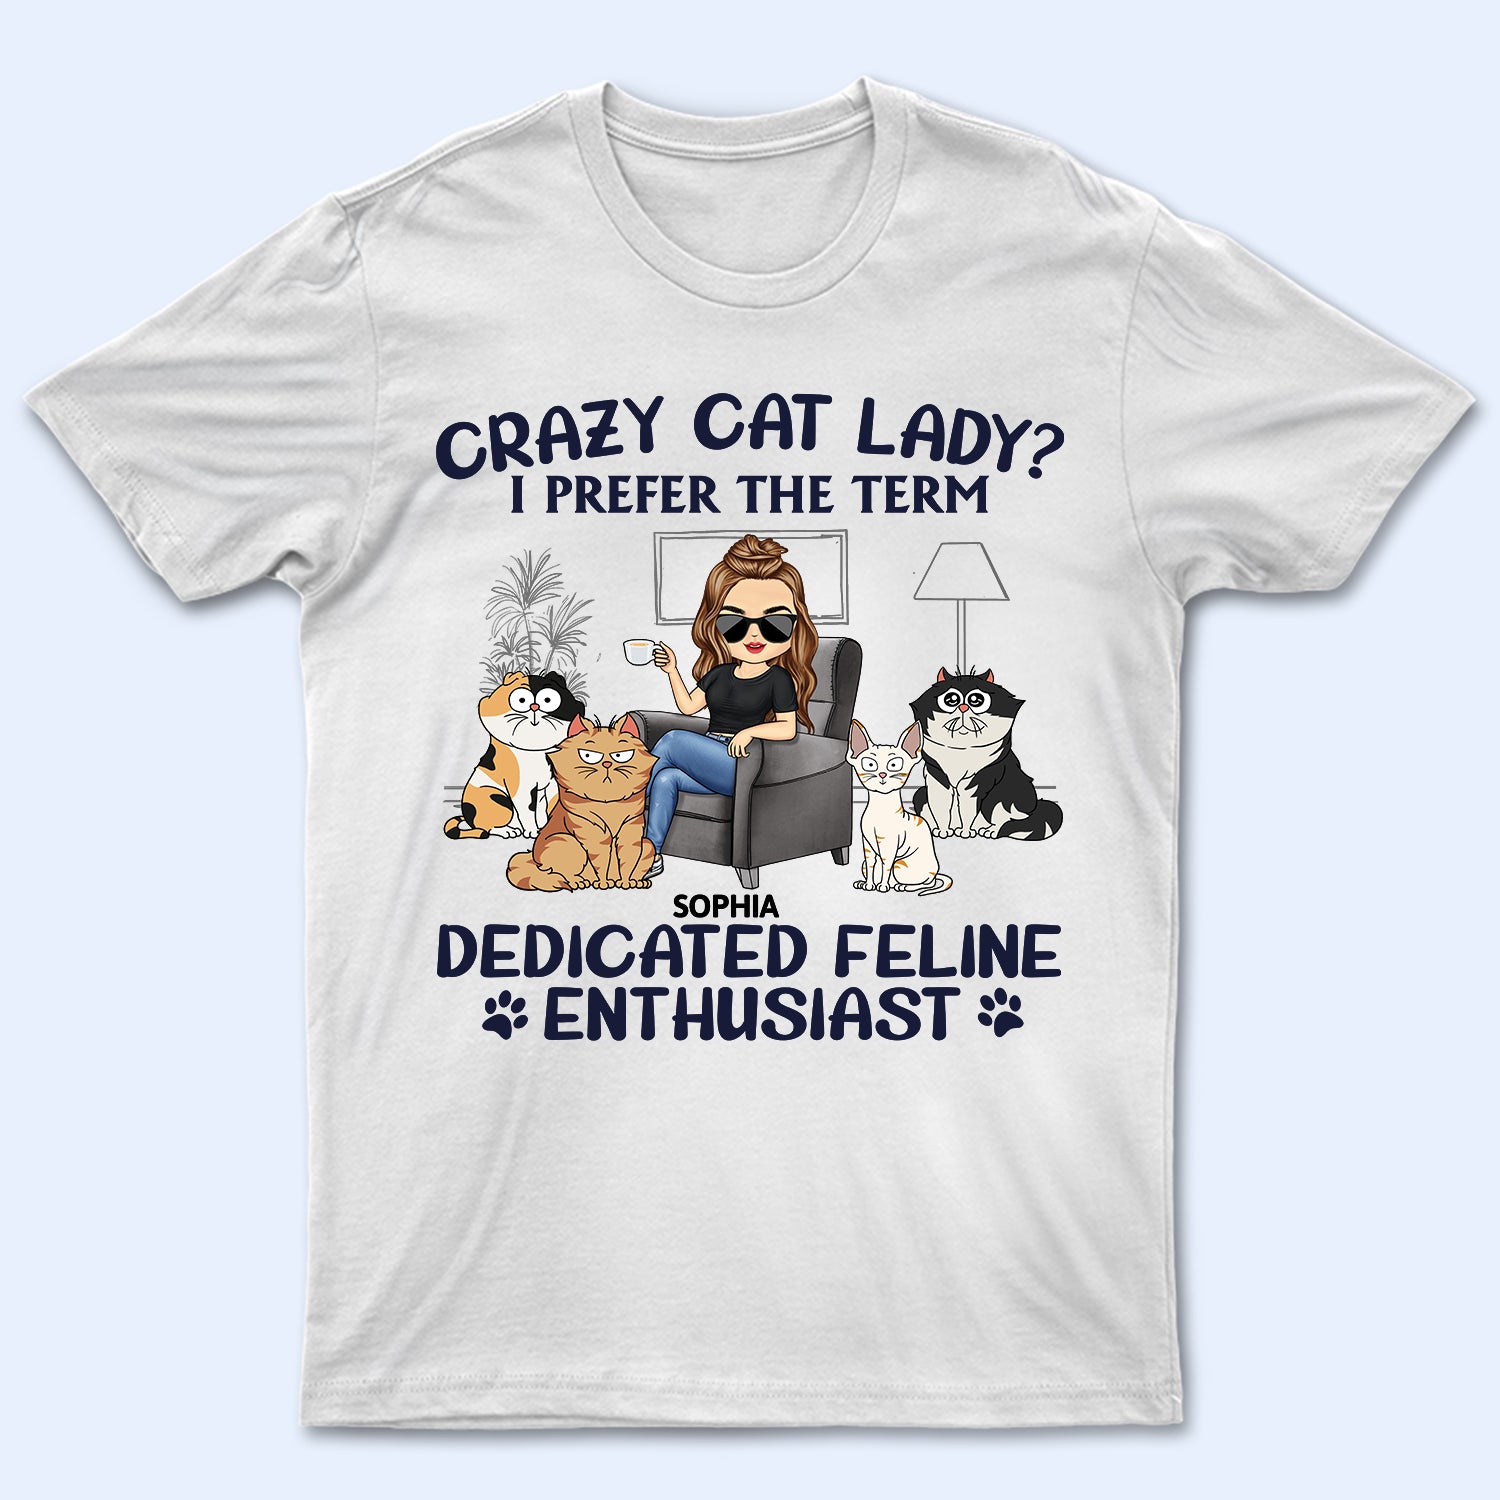 Dedicated Feline Enthusiast - Funny, Birthday Gift For Cat Lovers - Personalized T Shirt